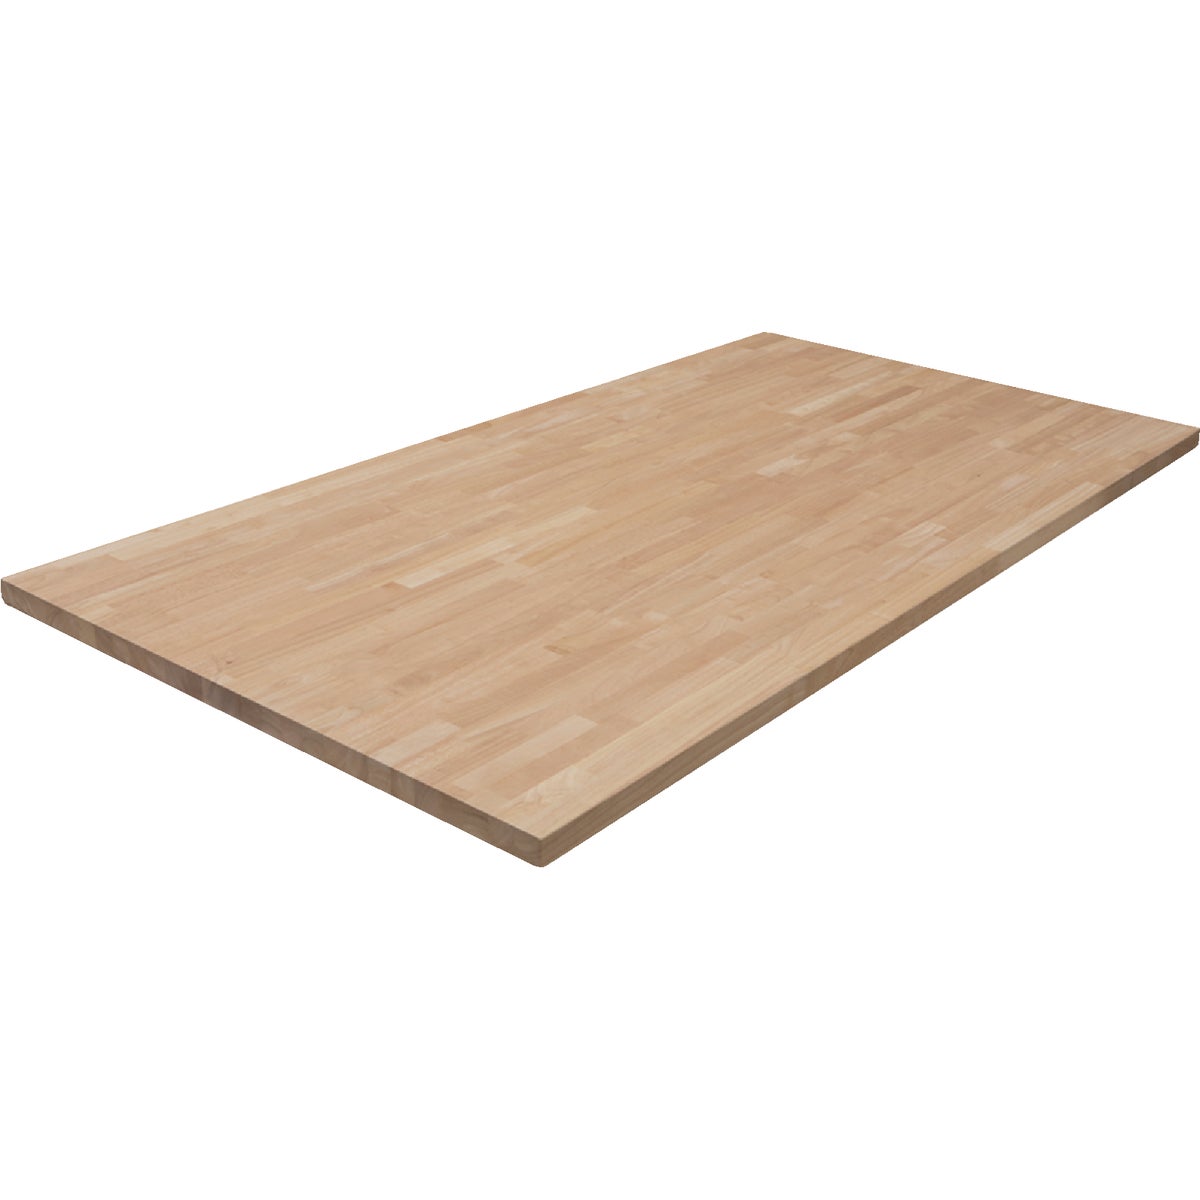 VT Industries CenterPointe 39 In. x 74 In. x 1.5 In. Unfinished Hevea Wood Butcher Block Countertop